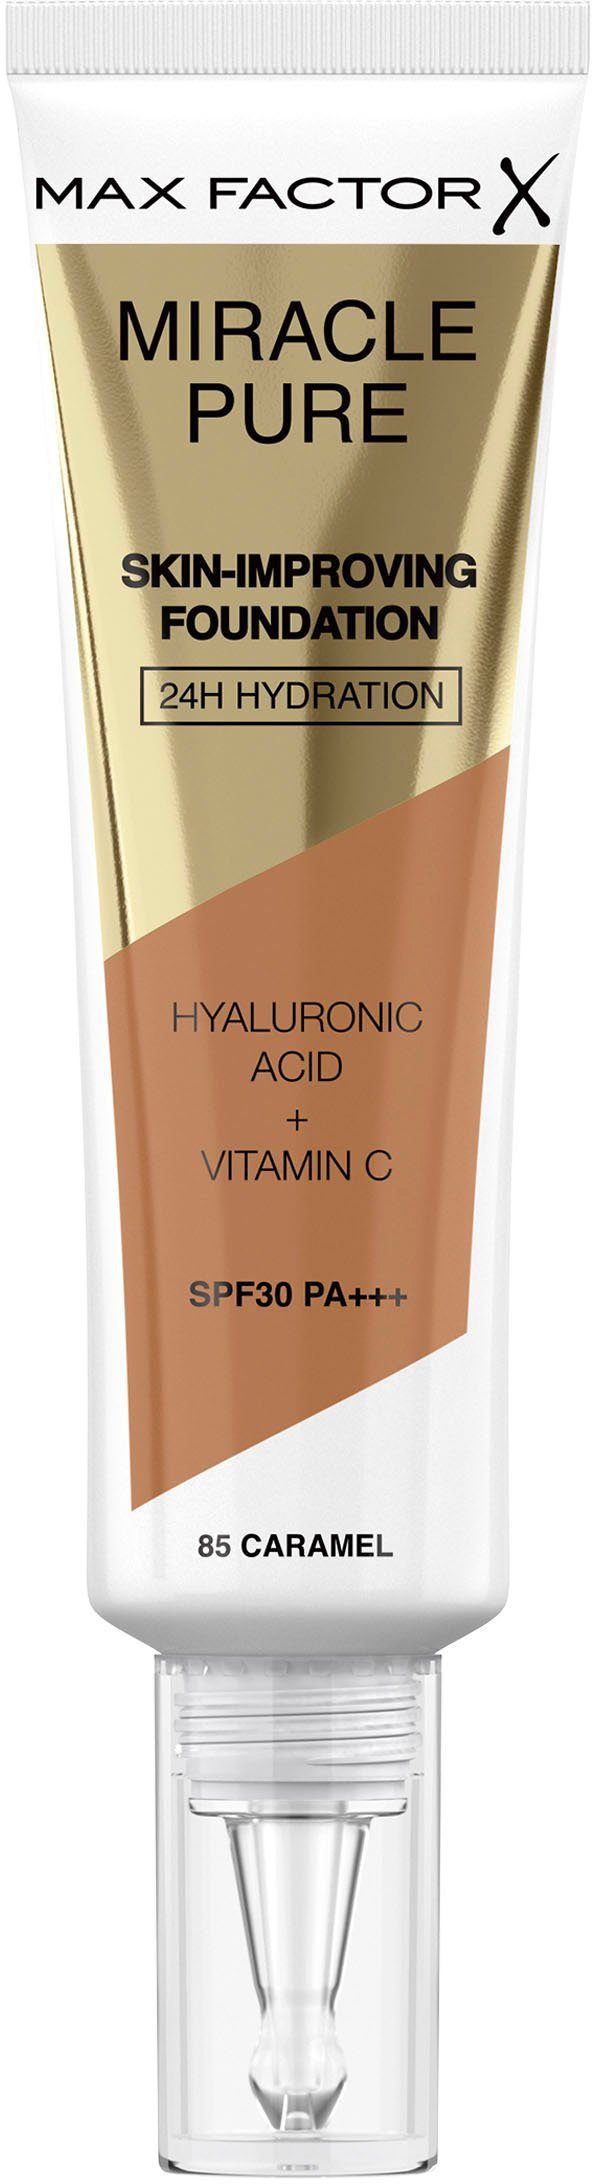 Auktionsinformationen wie z MAX FACTOR Foundation Miracle Pure Fb. Caramel 85